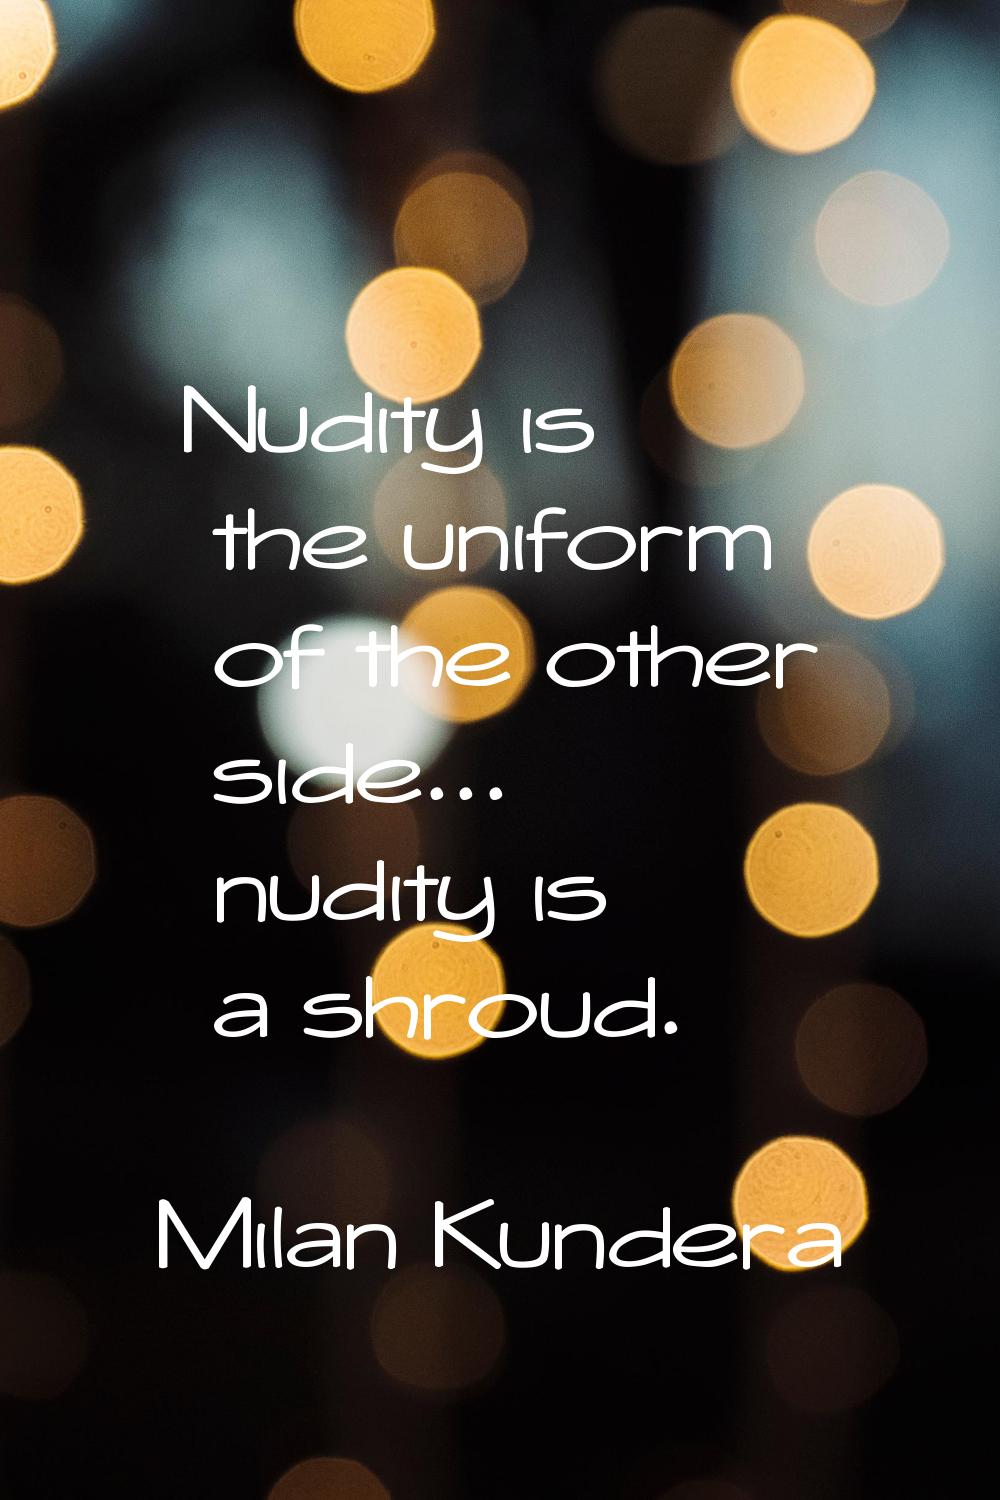 Nudity is the uniform of the other side... nudity is a shroud.